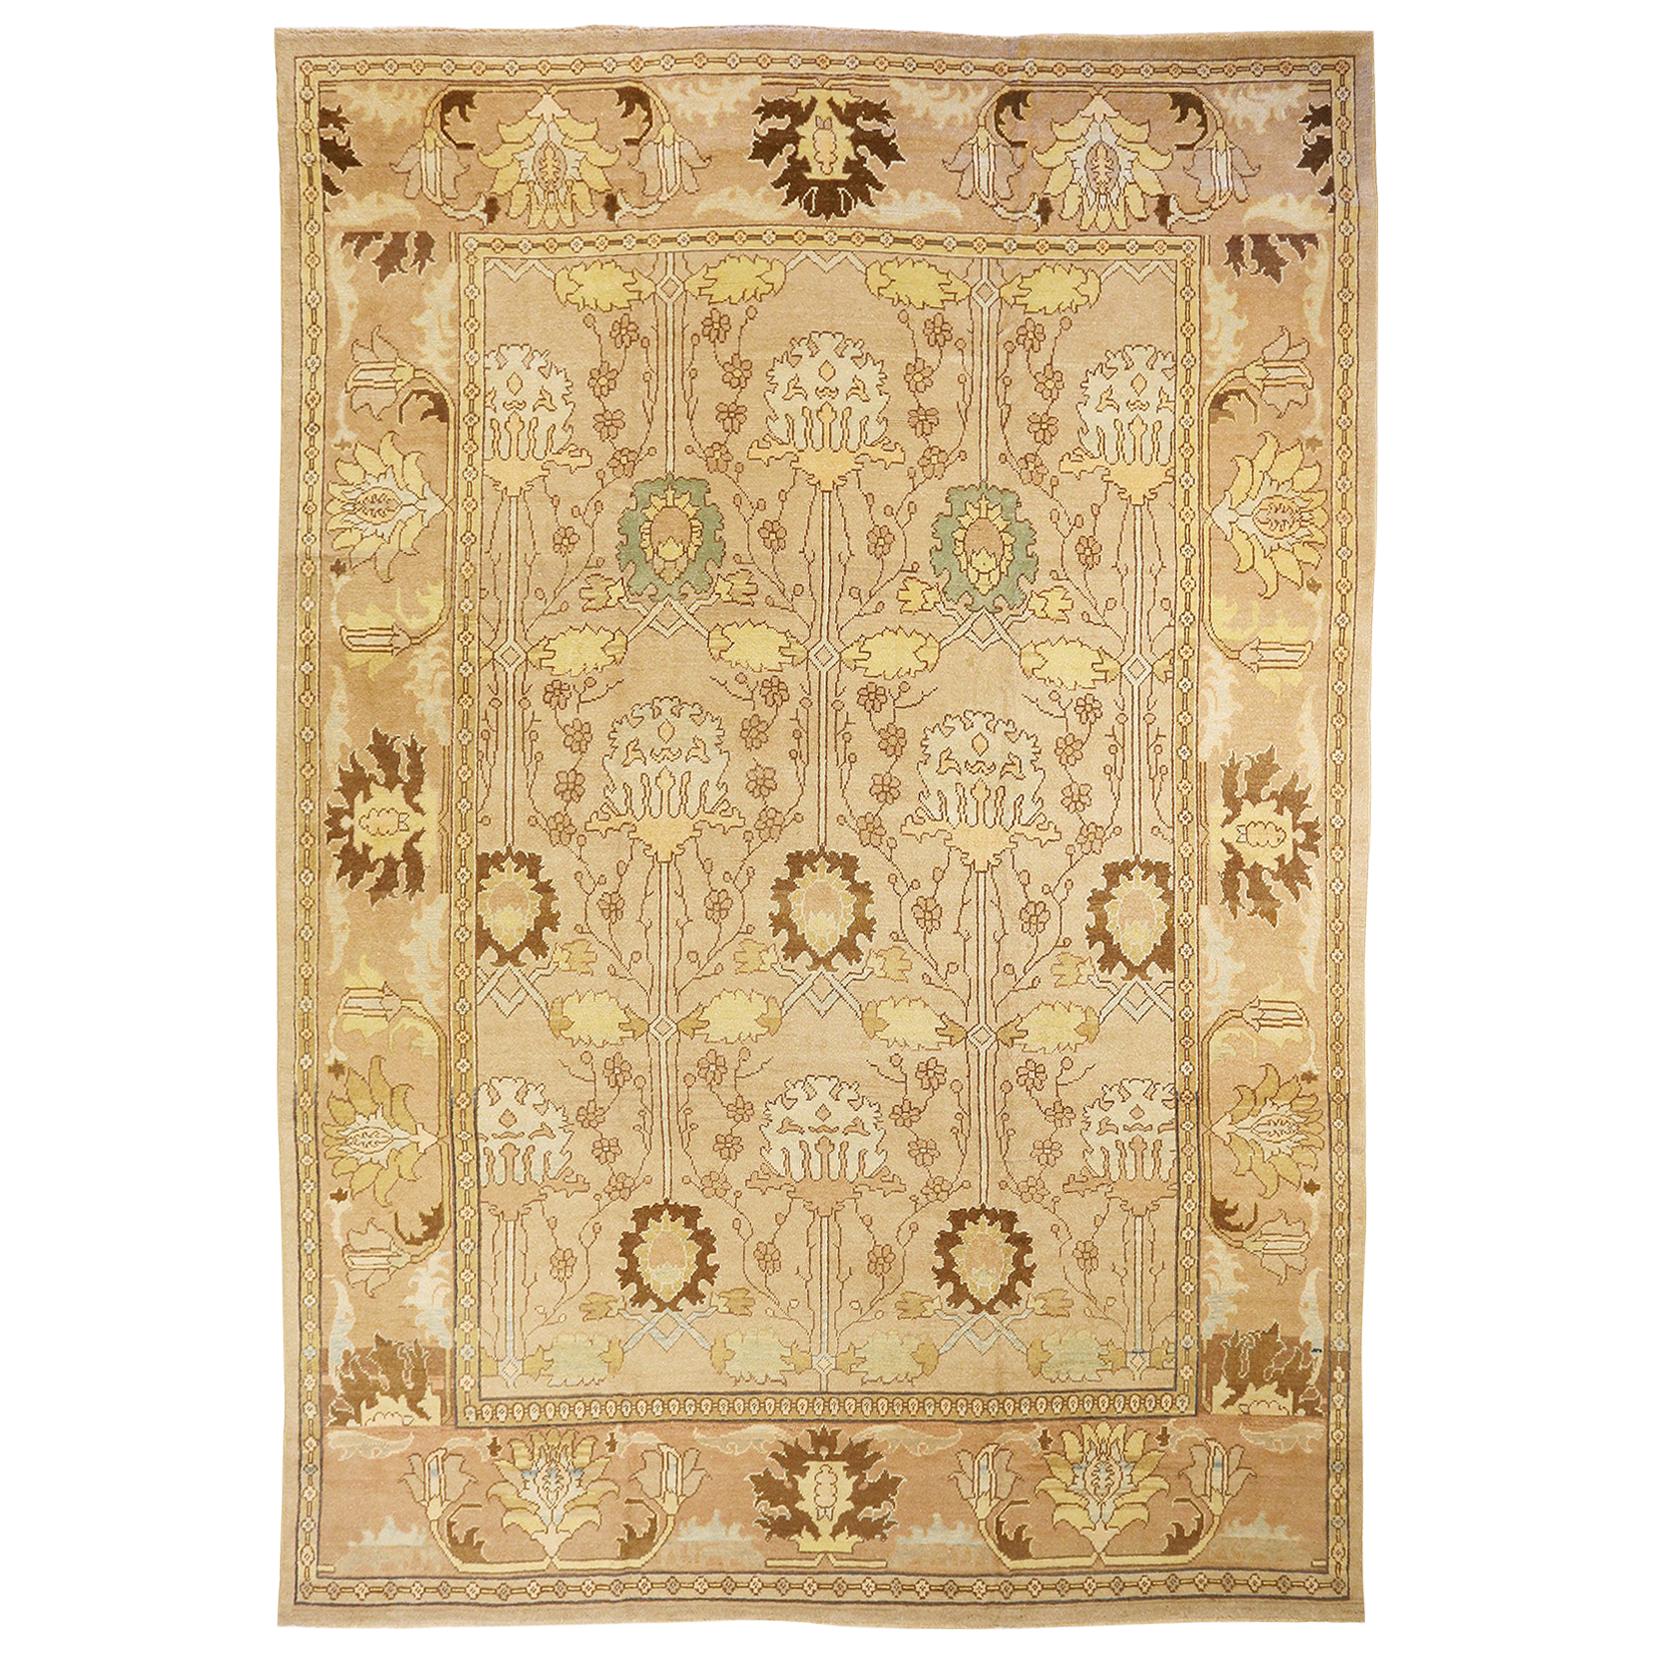 Contemporary Turkish Donegal Rug with Brown and Beige Flower Details